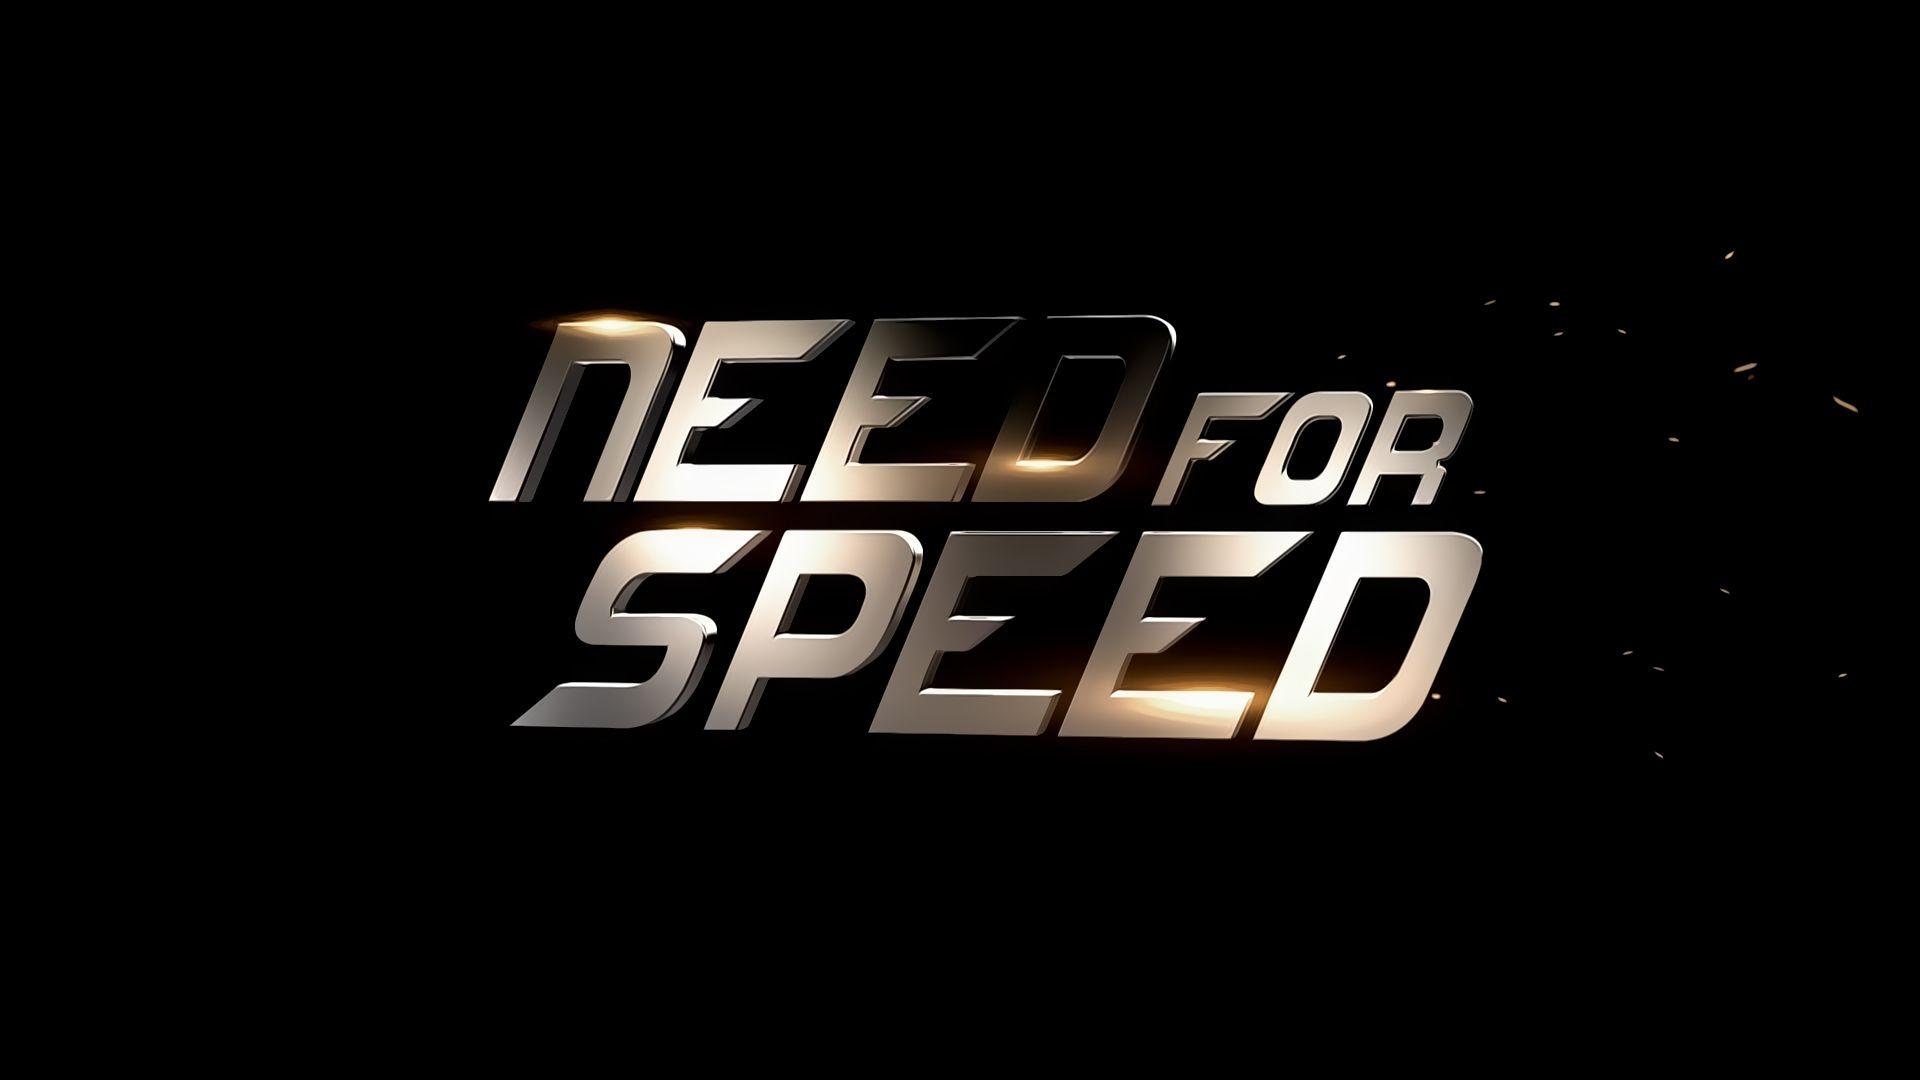 Need For Speed 2014 Movie Wallpaper HD 1920×1080